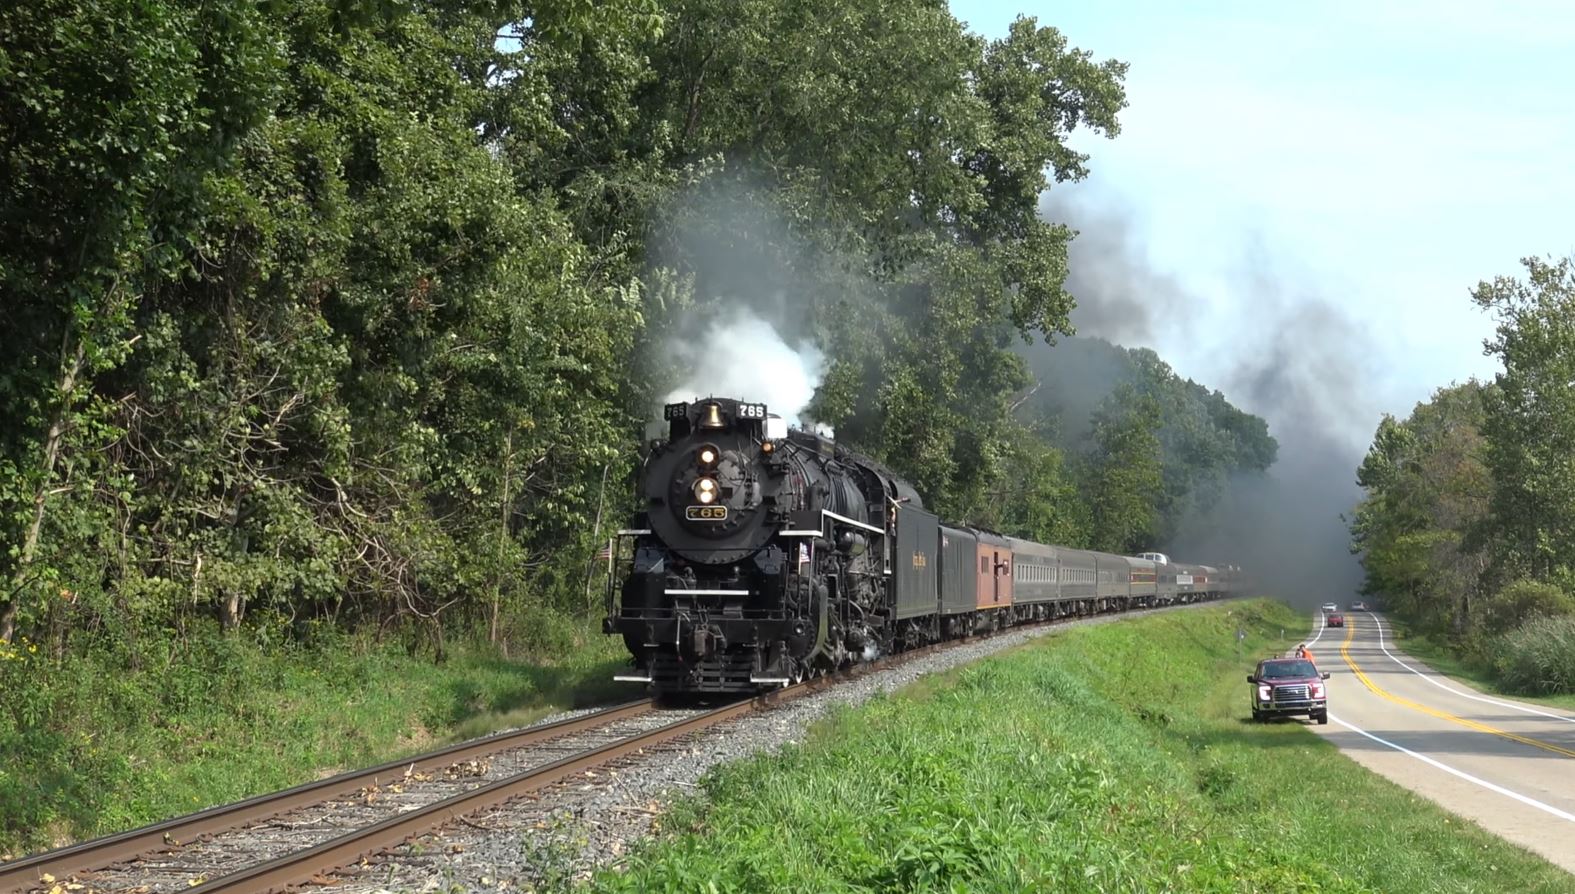 Steam In The Valley 2021 - The Berk's Grand Return to the Valley!